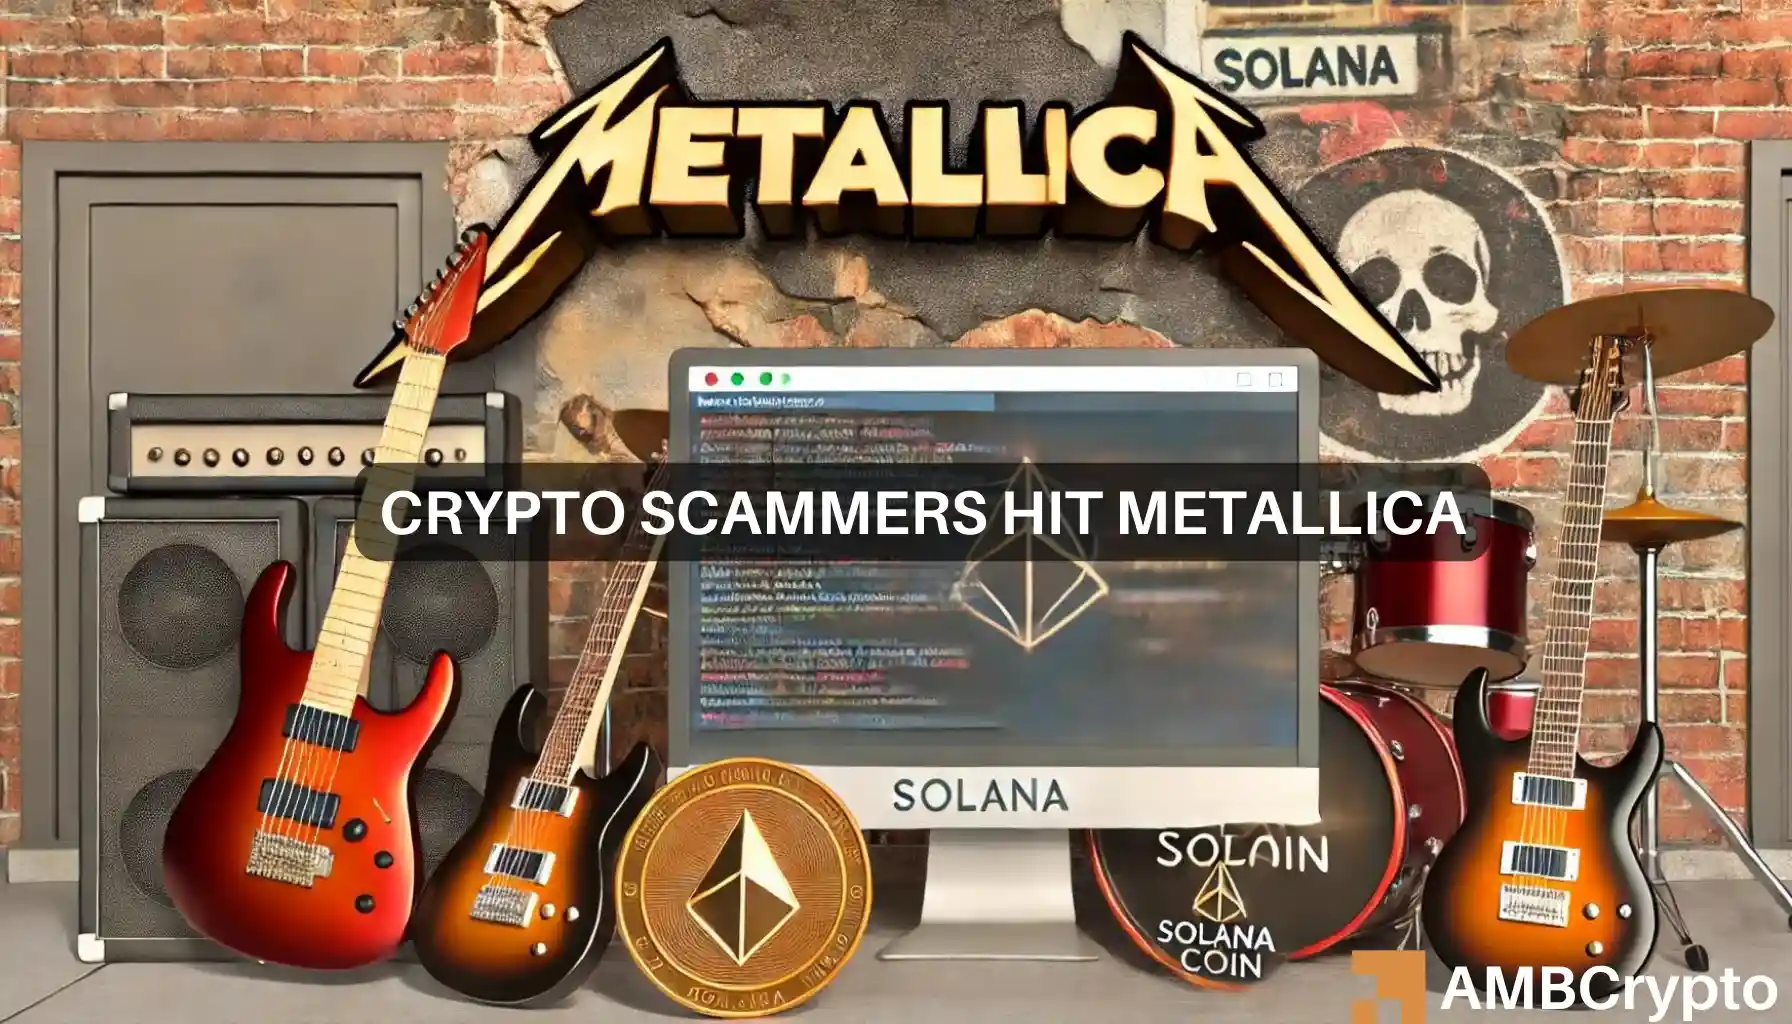 Metallica falls victim to crypto scam, X account hacked